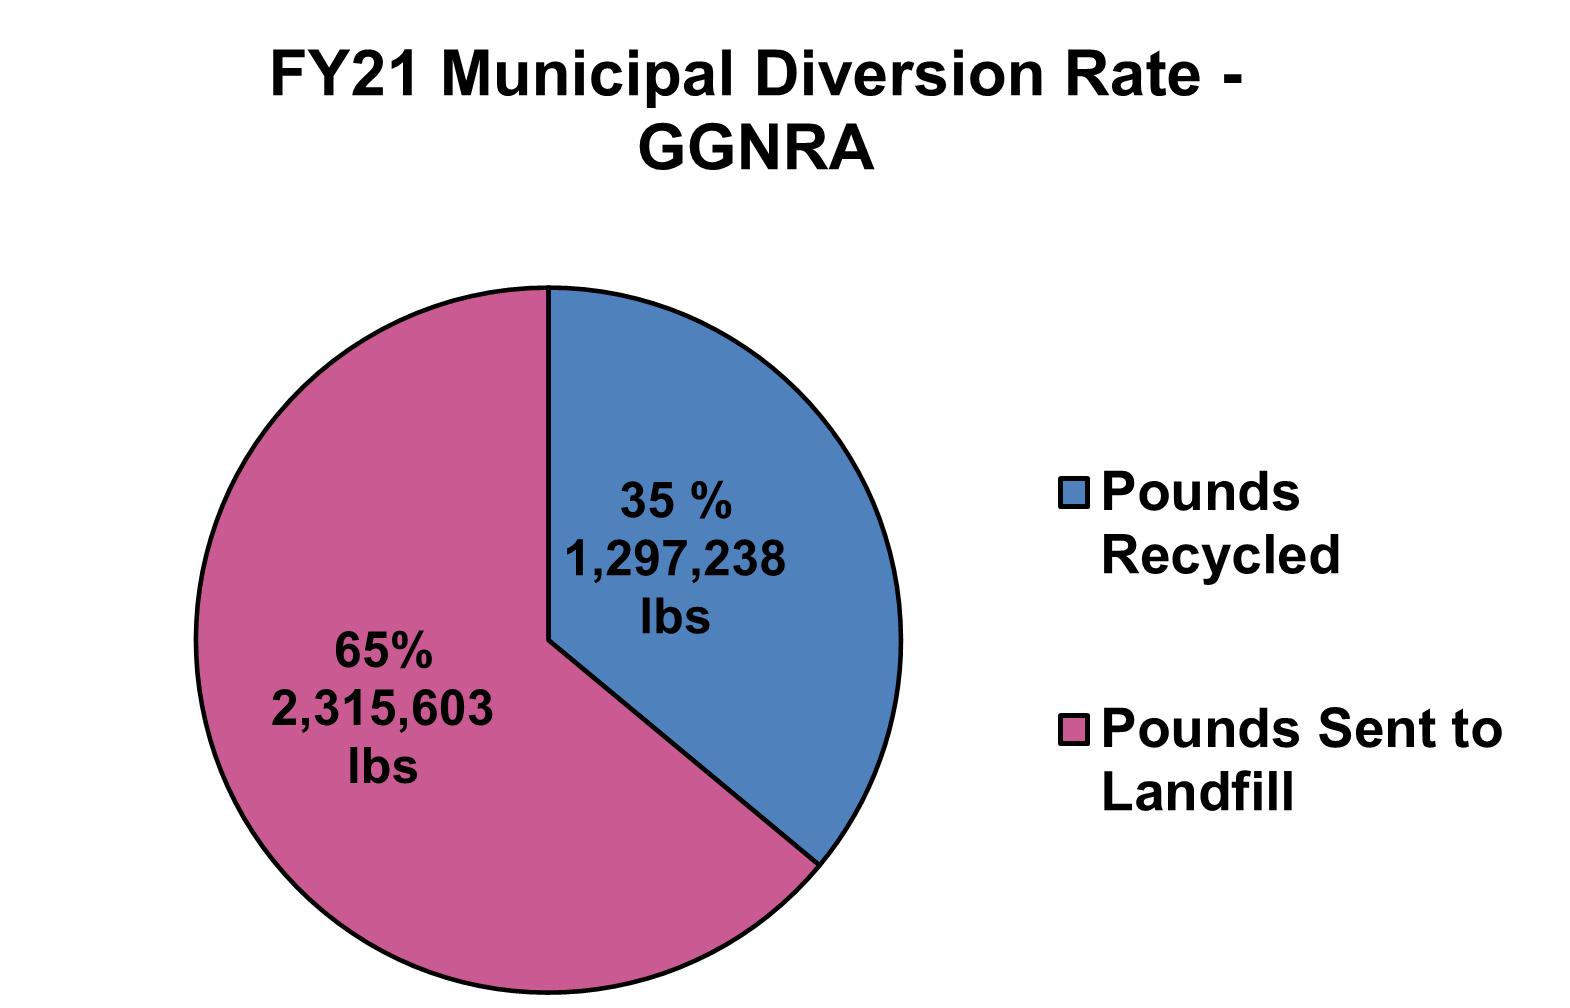 A pie chart showing the amount of waste sent to landfill and recycled in Fiscal Year 2021